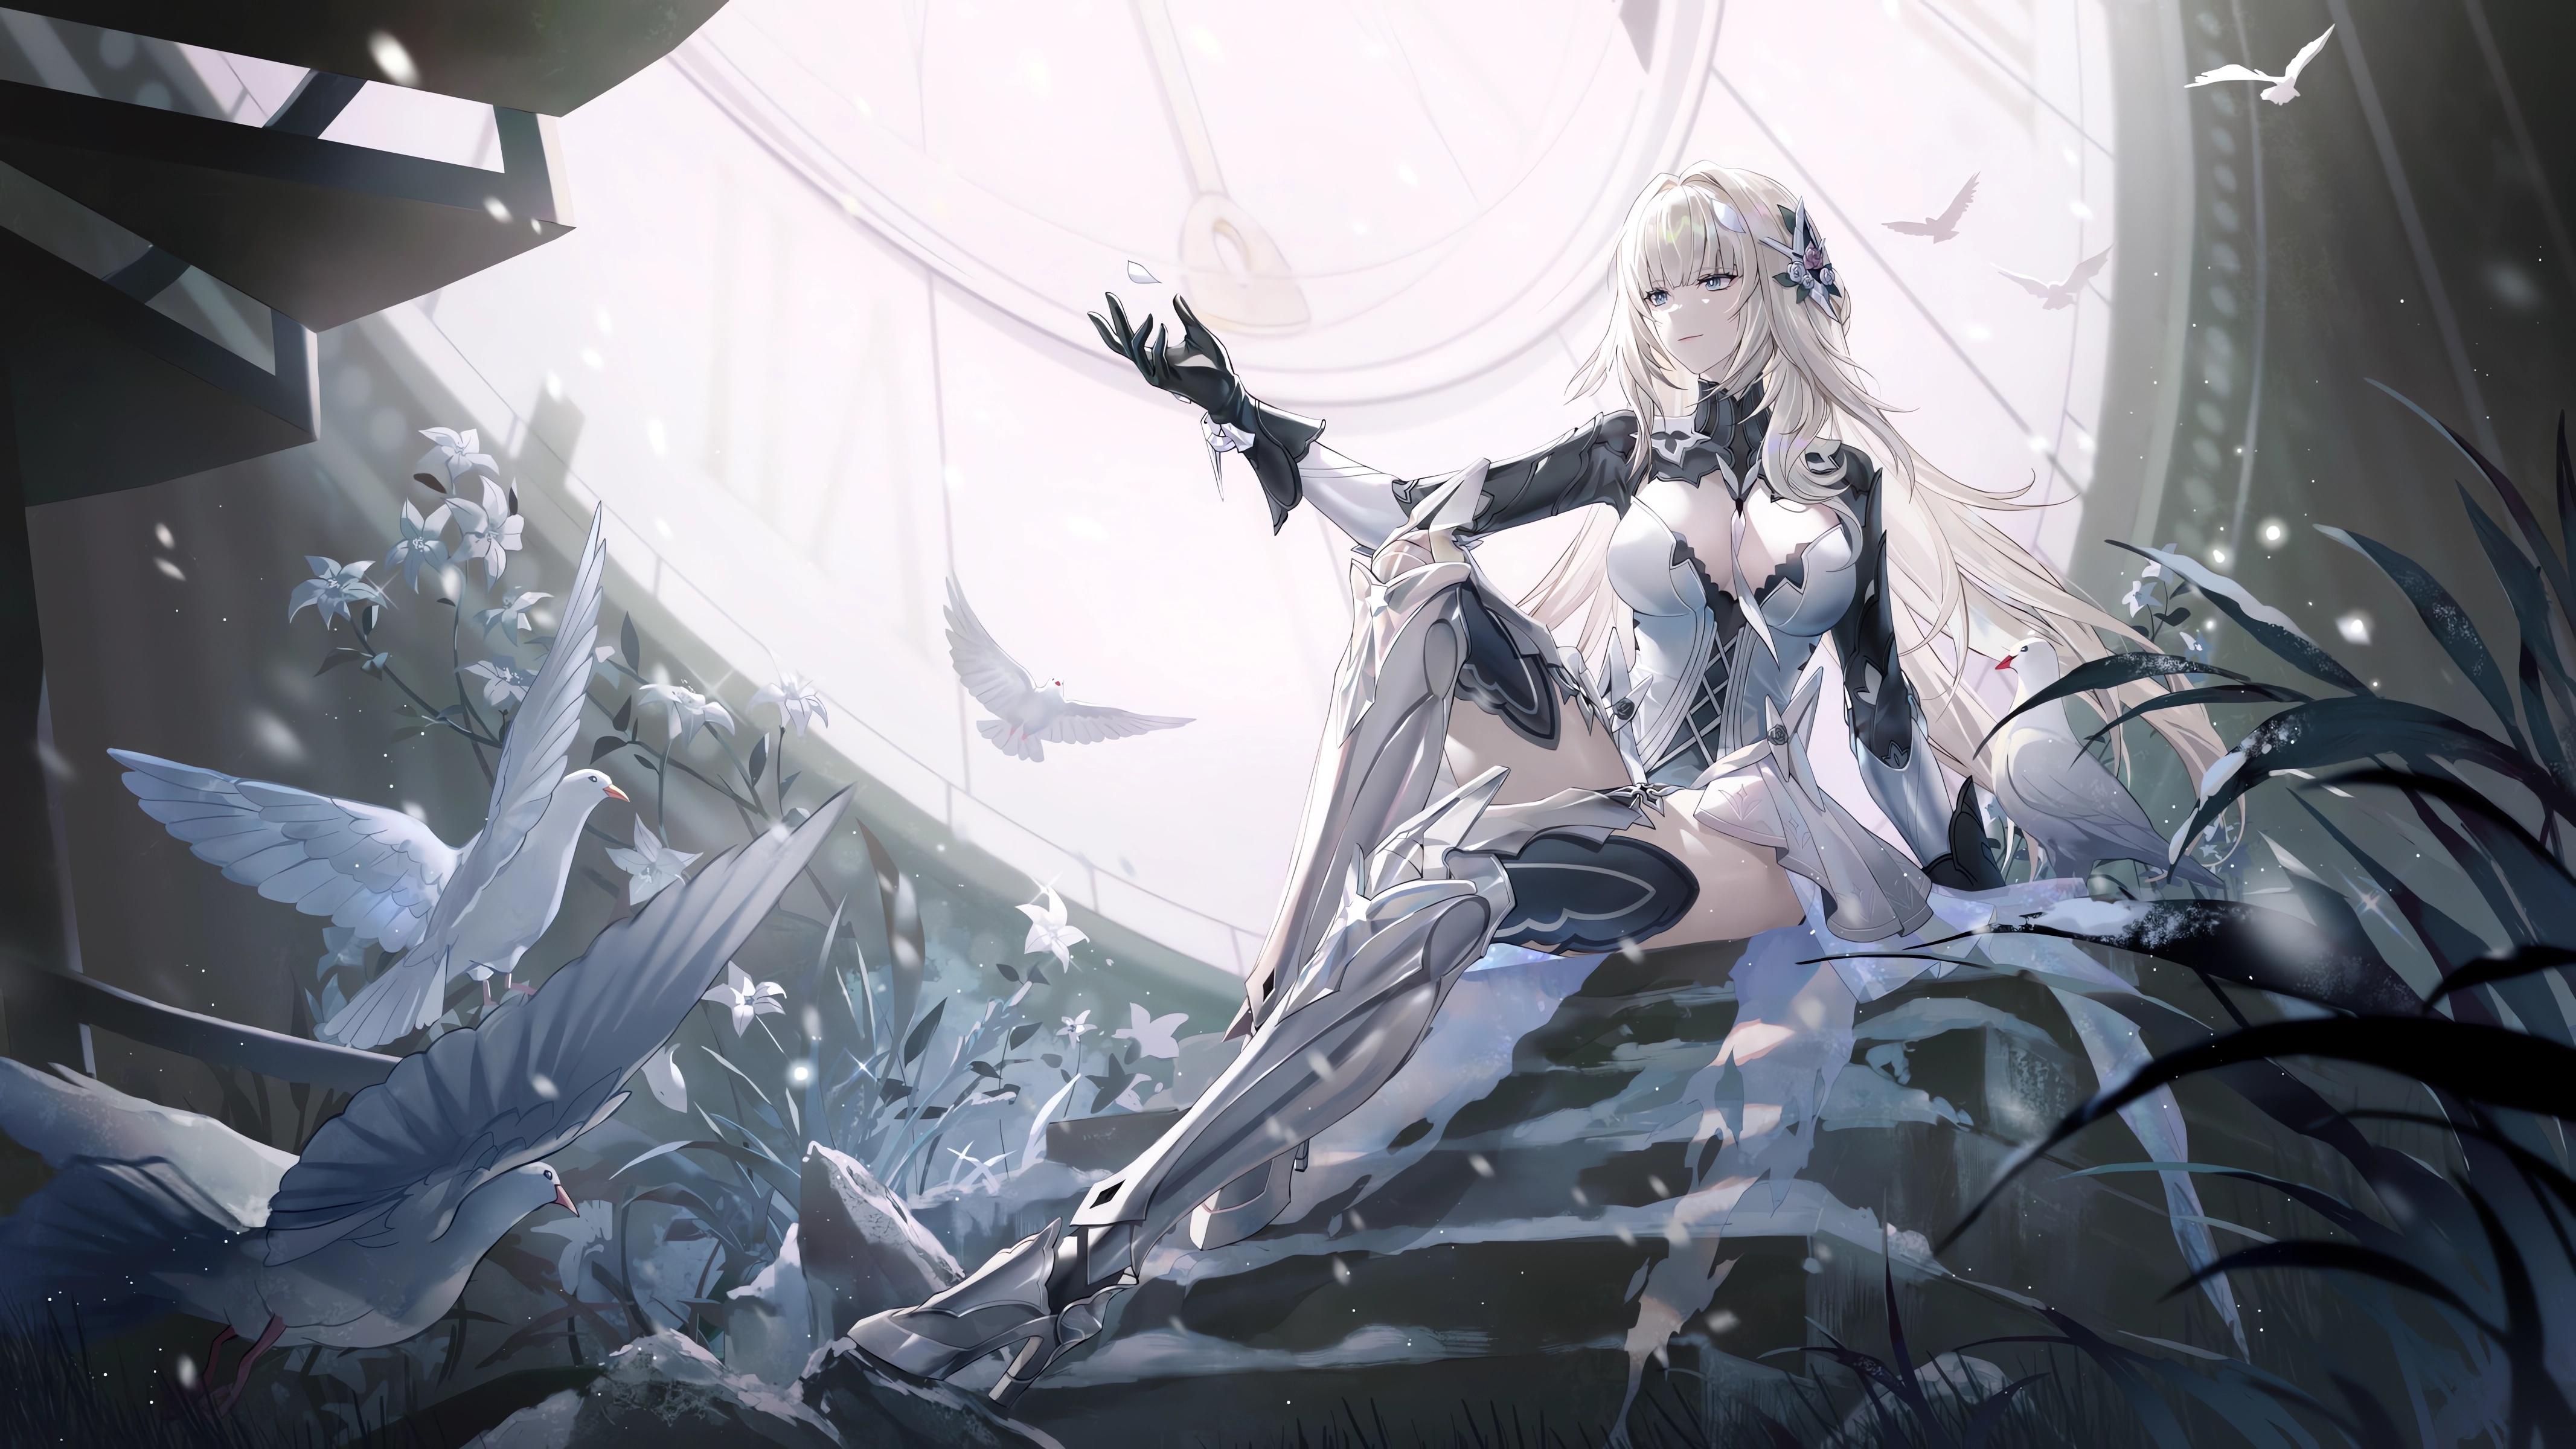 Anime 4266x2400 anime anime girls Punishing: Gray Raven Bianca (Punishing: Gray Raven) sitting birds leaves looking away long hair closed mouth smiling snow heels flowers big boobs animals flower in hair blonde blue eyes gloves thighs arms reaching Criin